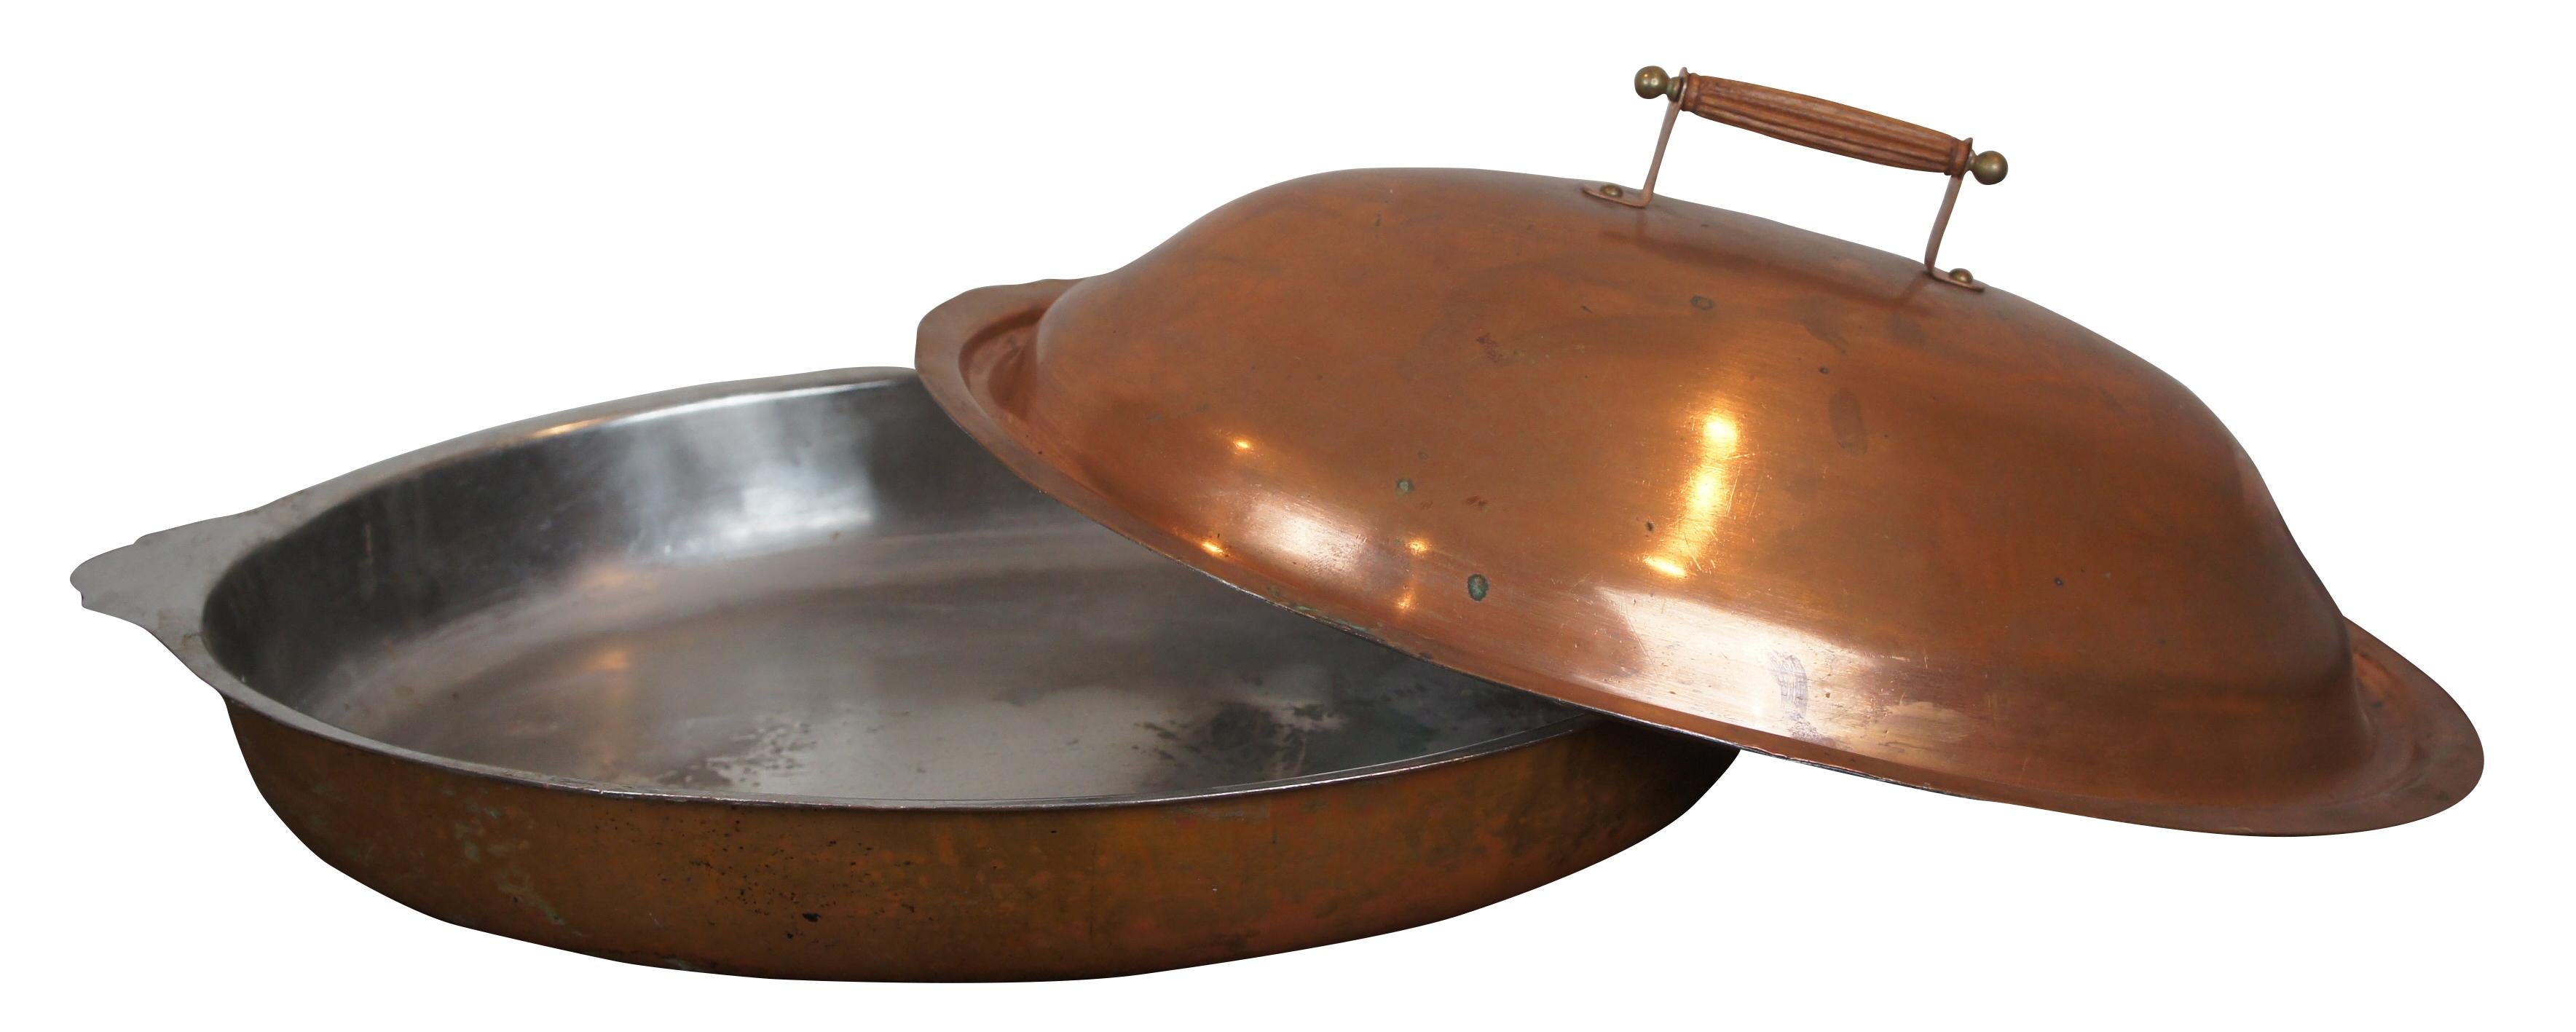 Vintage large Legion Utensils Scavullo copper platter with cover / chafing / casserole / roasting dish featuring oval form with tin lining and wood handle. 9, 55.
      